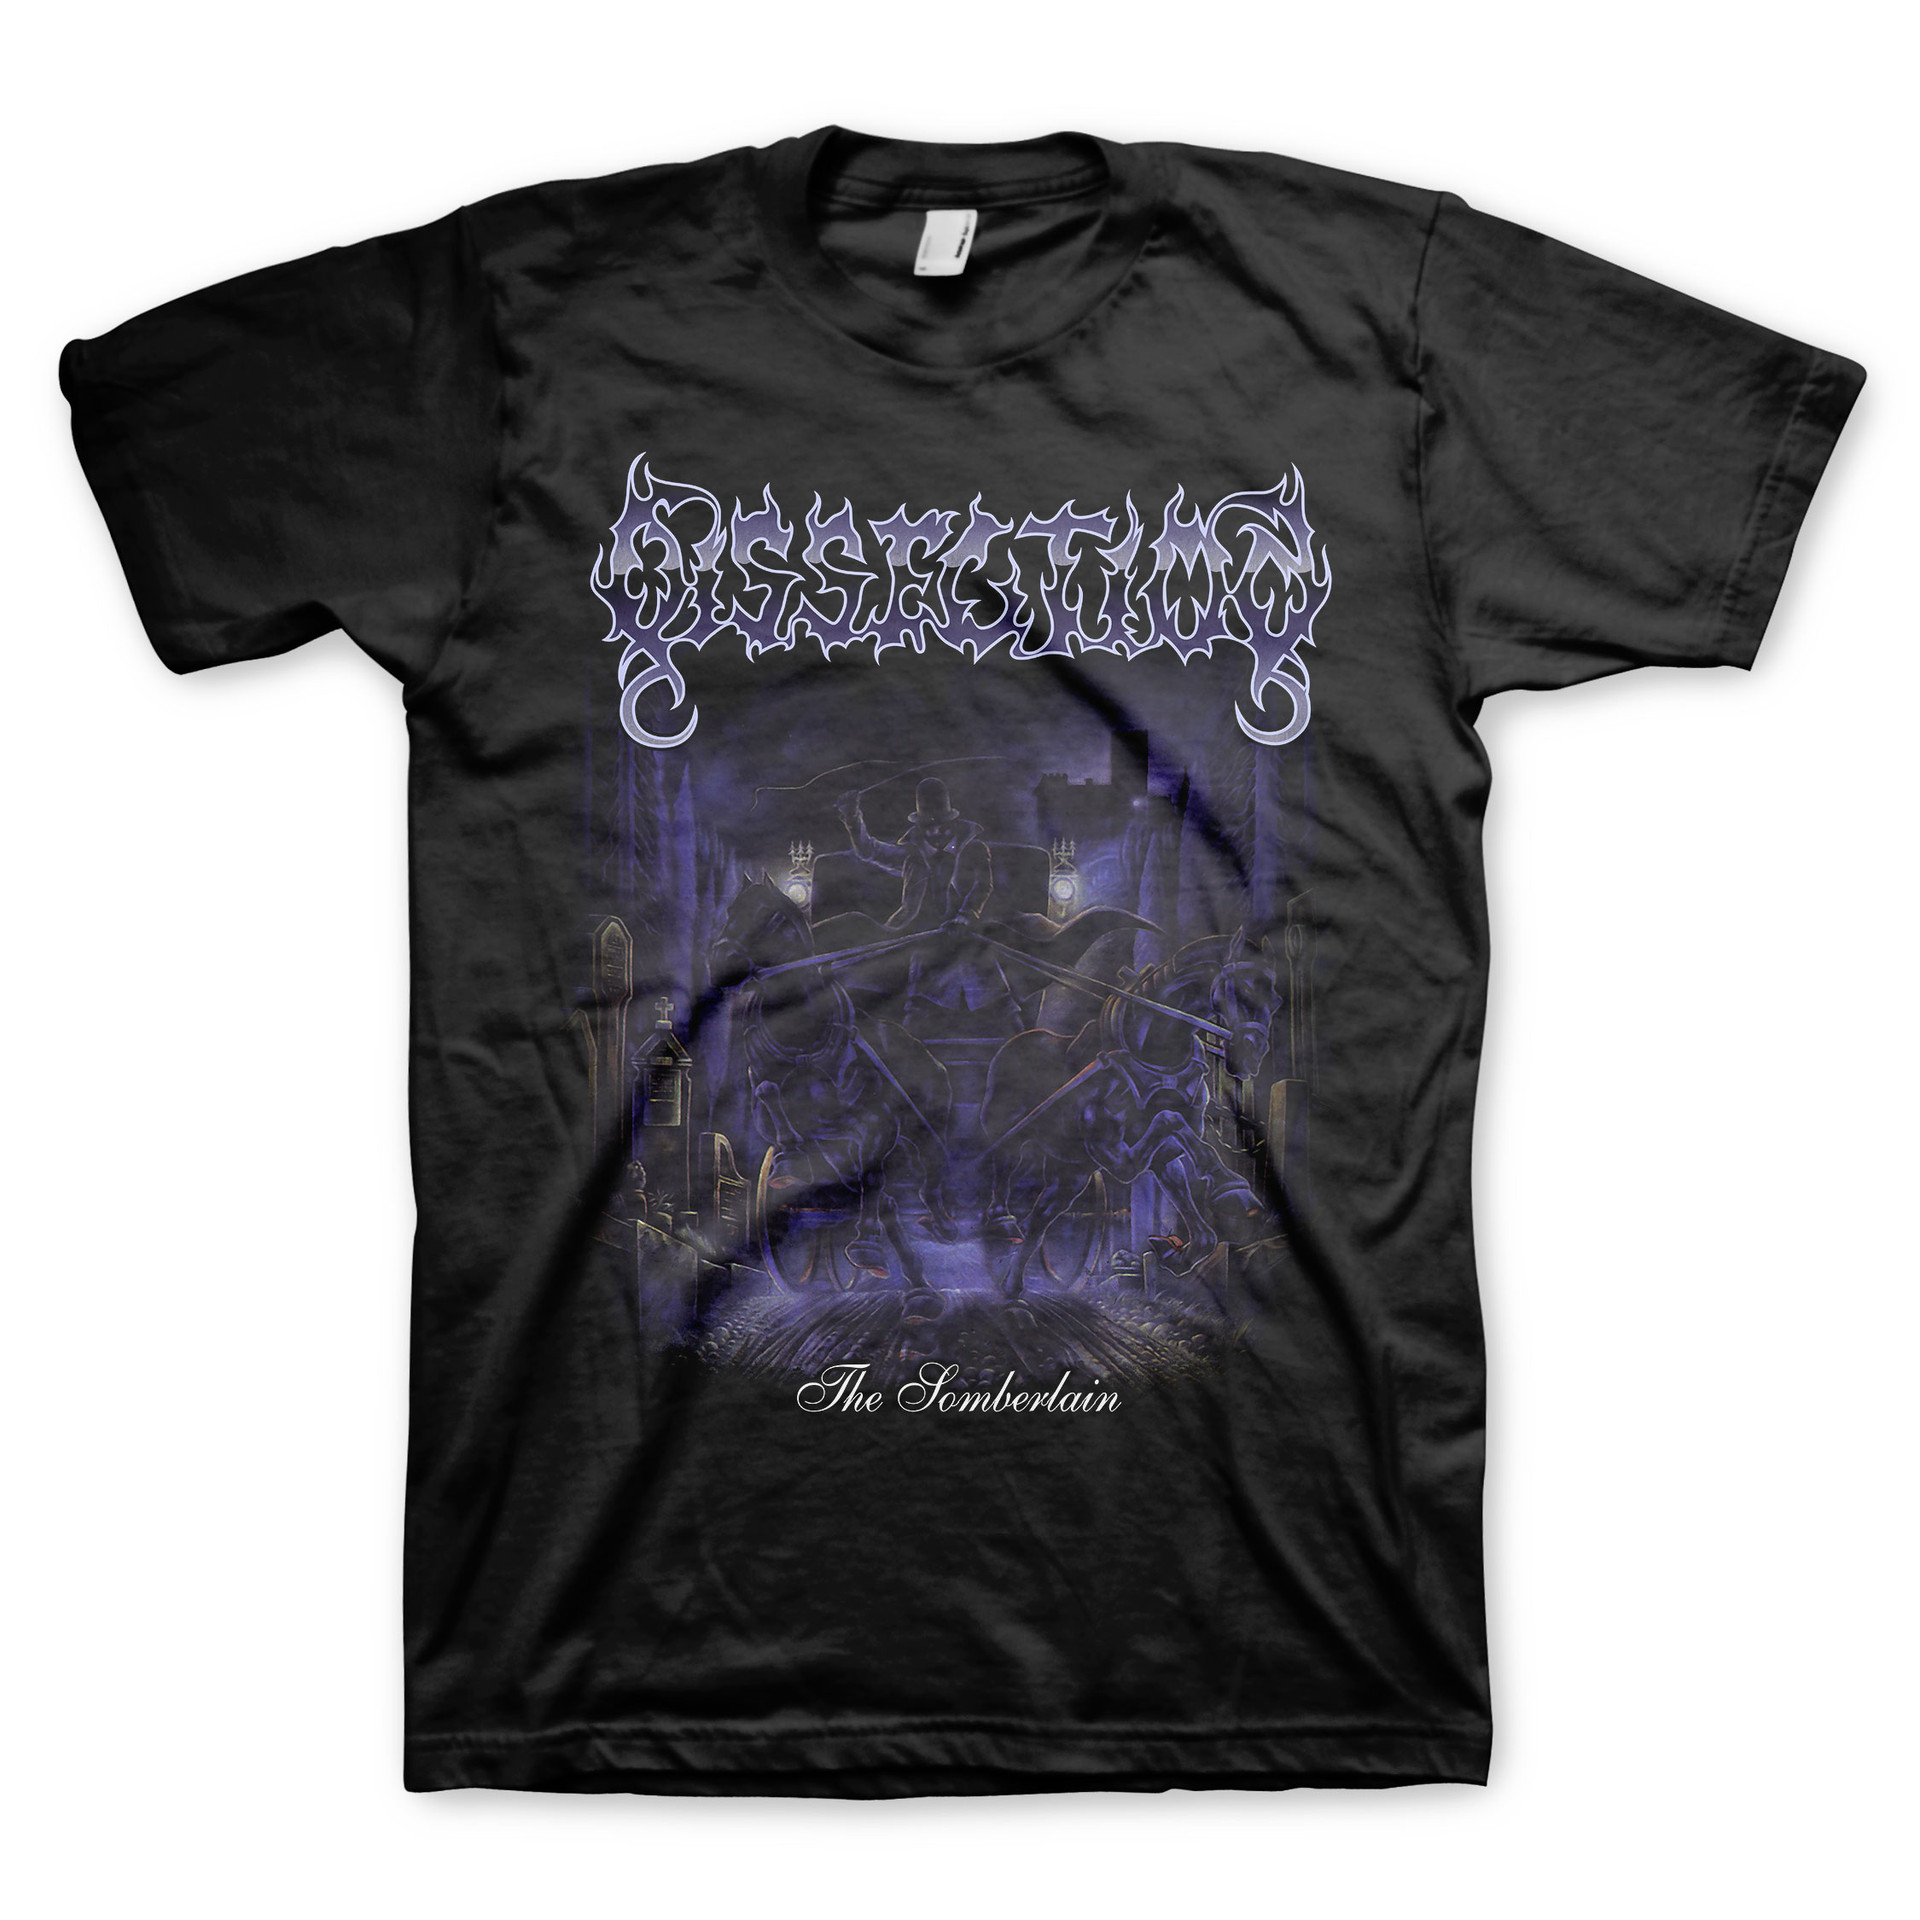 Artists - Dissection - Official Band Shirts